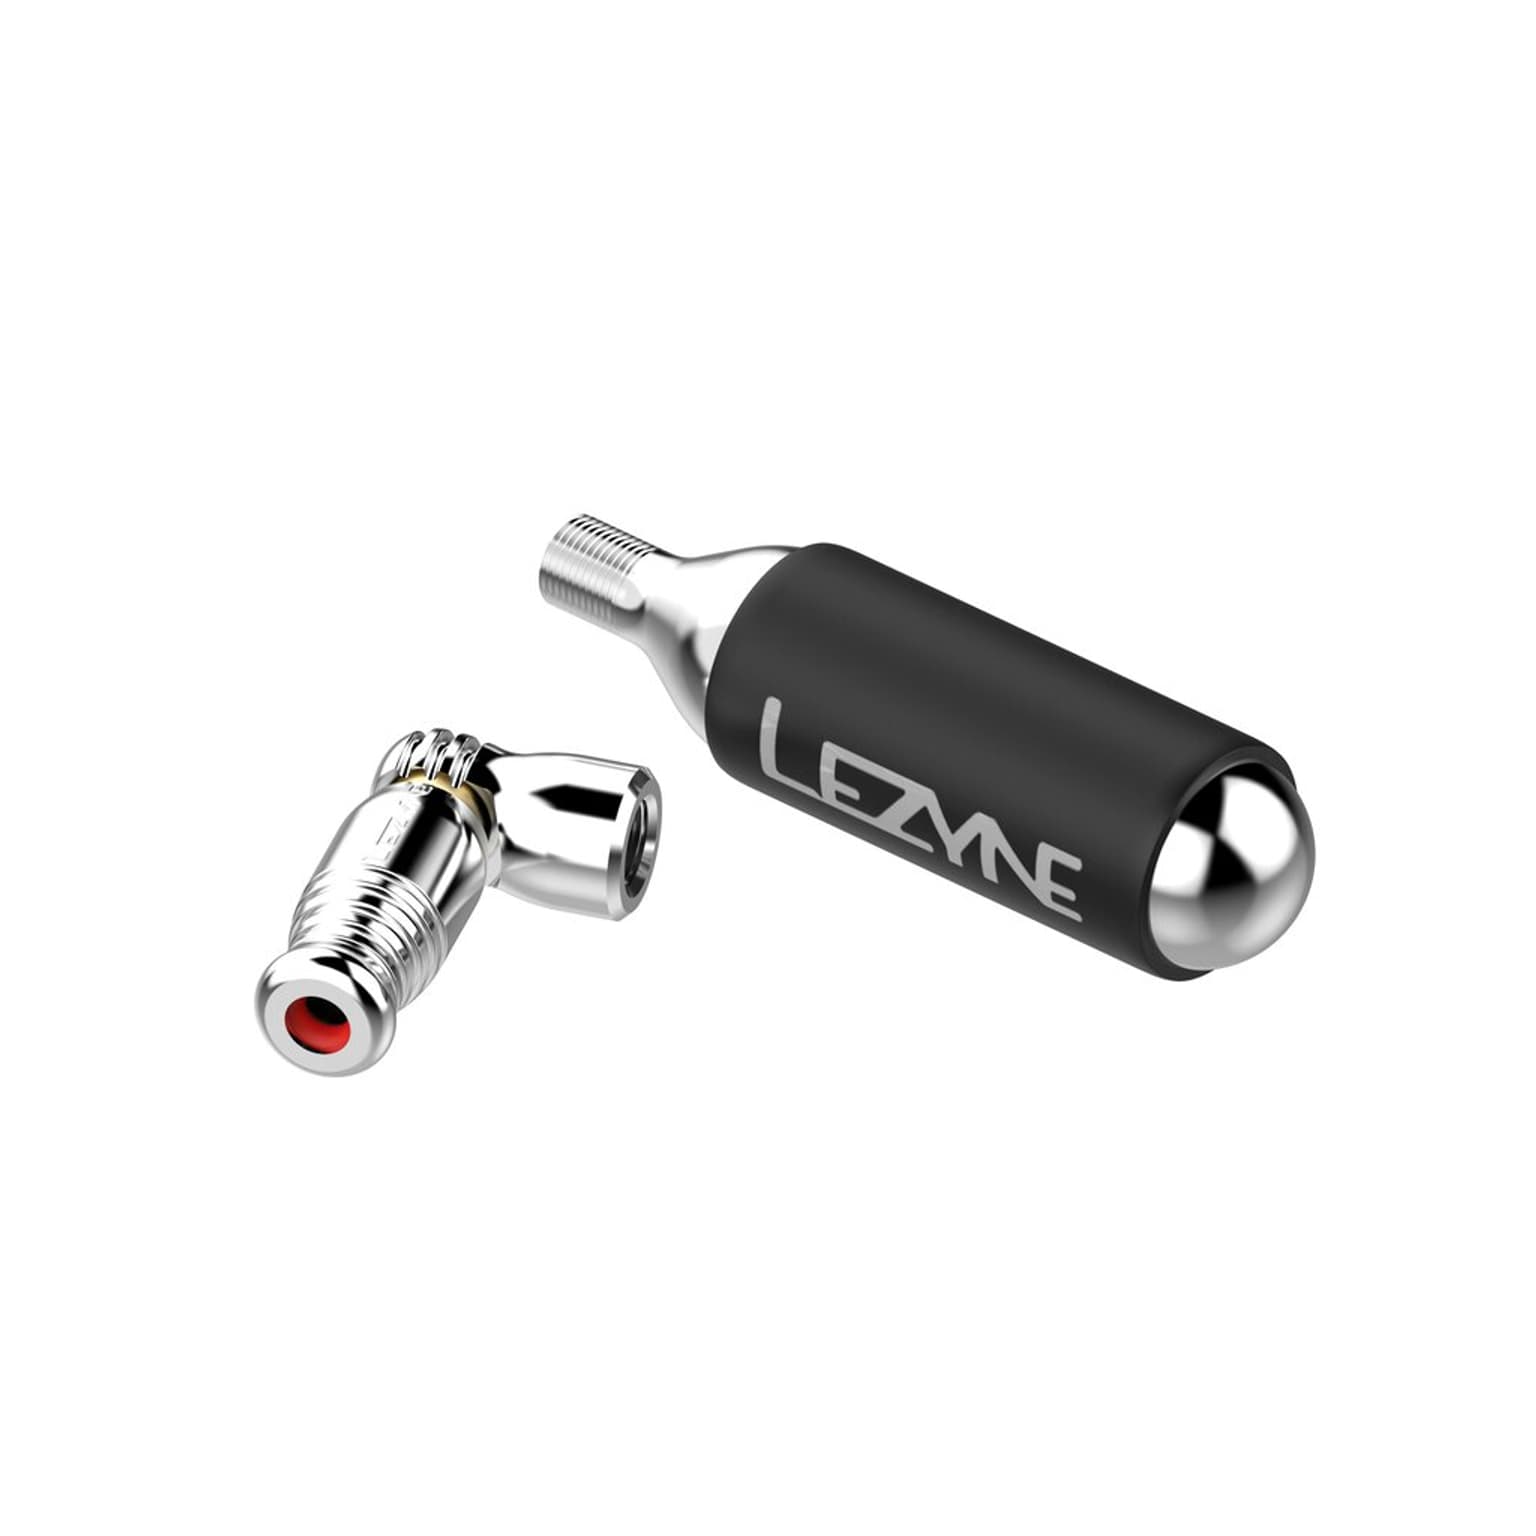 Lezyne Lezyne Trigger Speed Drive CO2 With 16G Cartridge Pompa per bici argento 1